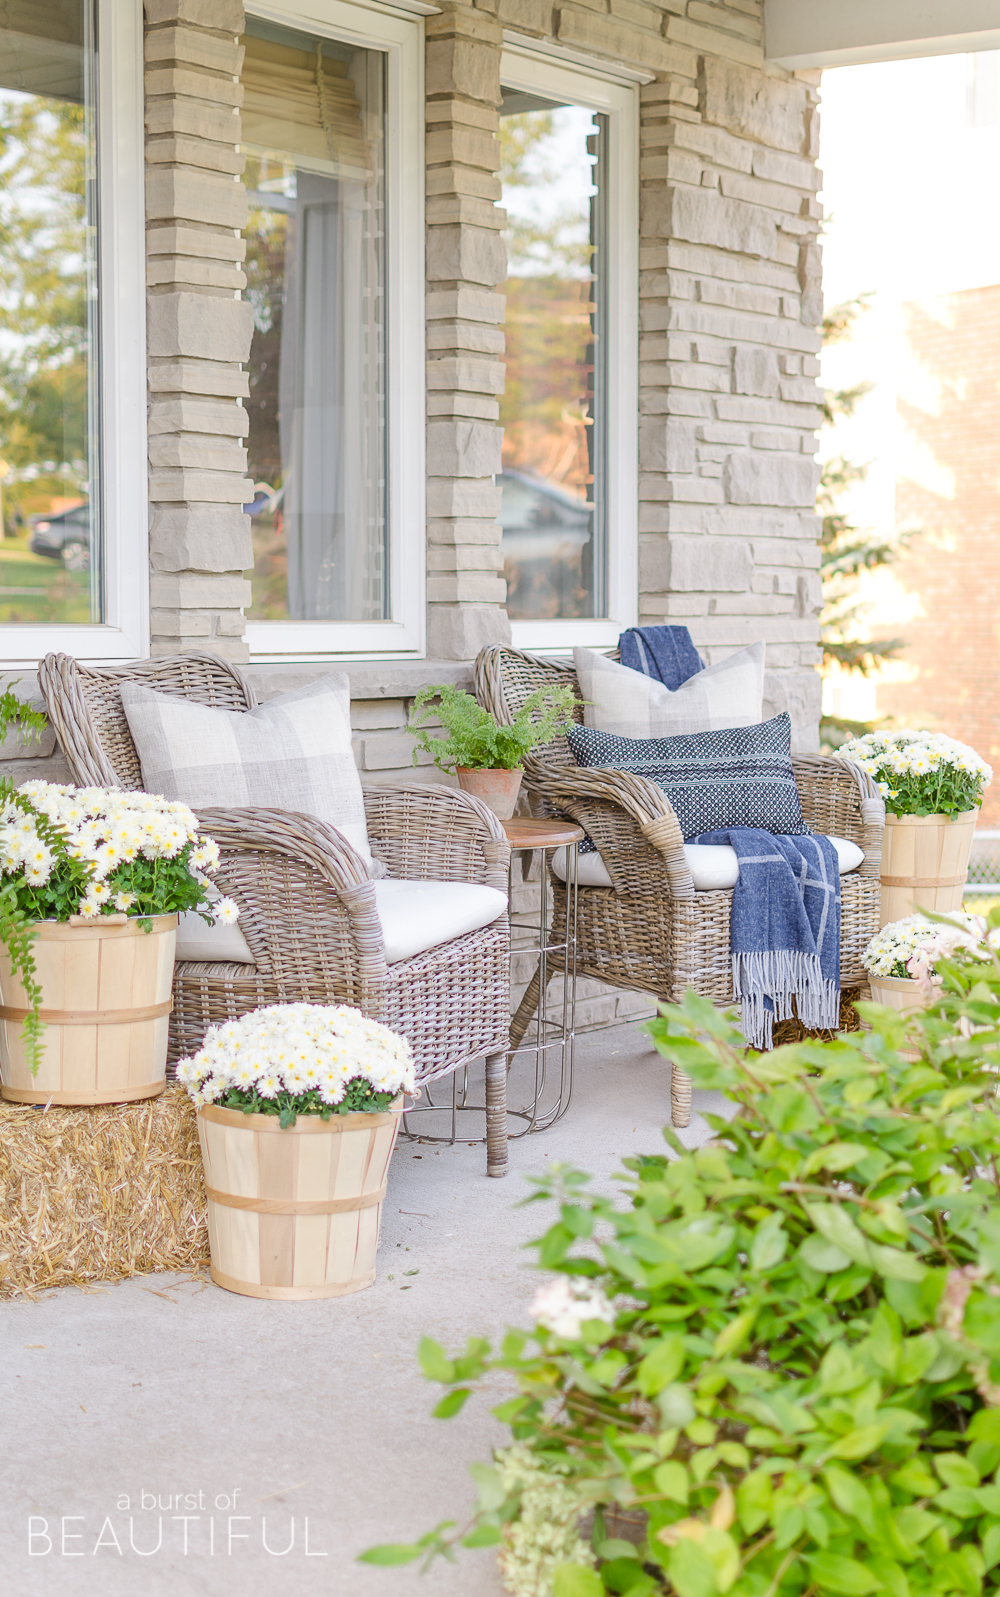 https://www.nickandalicia.com/wp-content/uploads/2017/09/Early-Fall-Front-Porch-4008.jpg